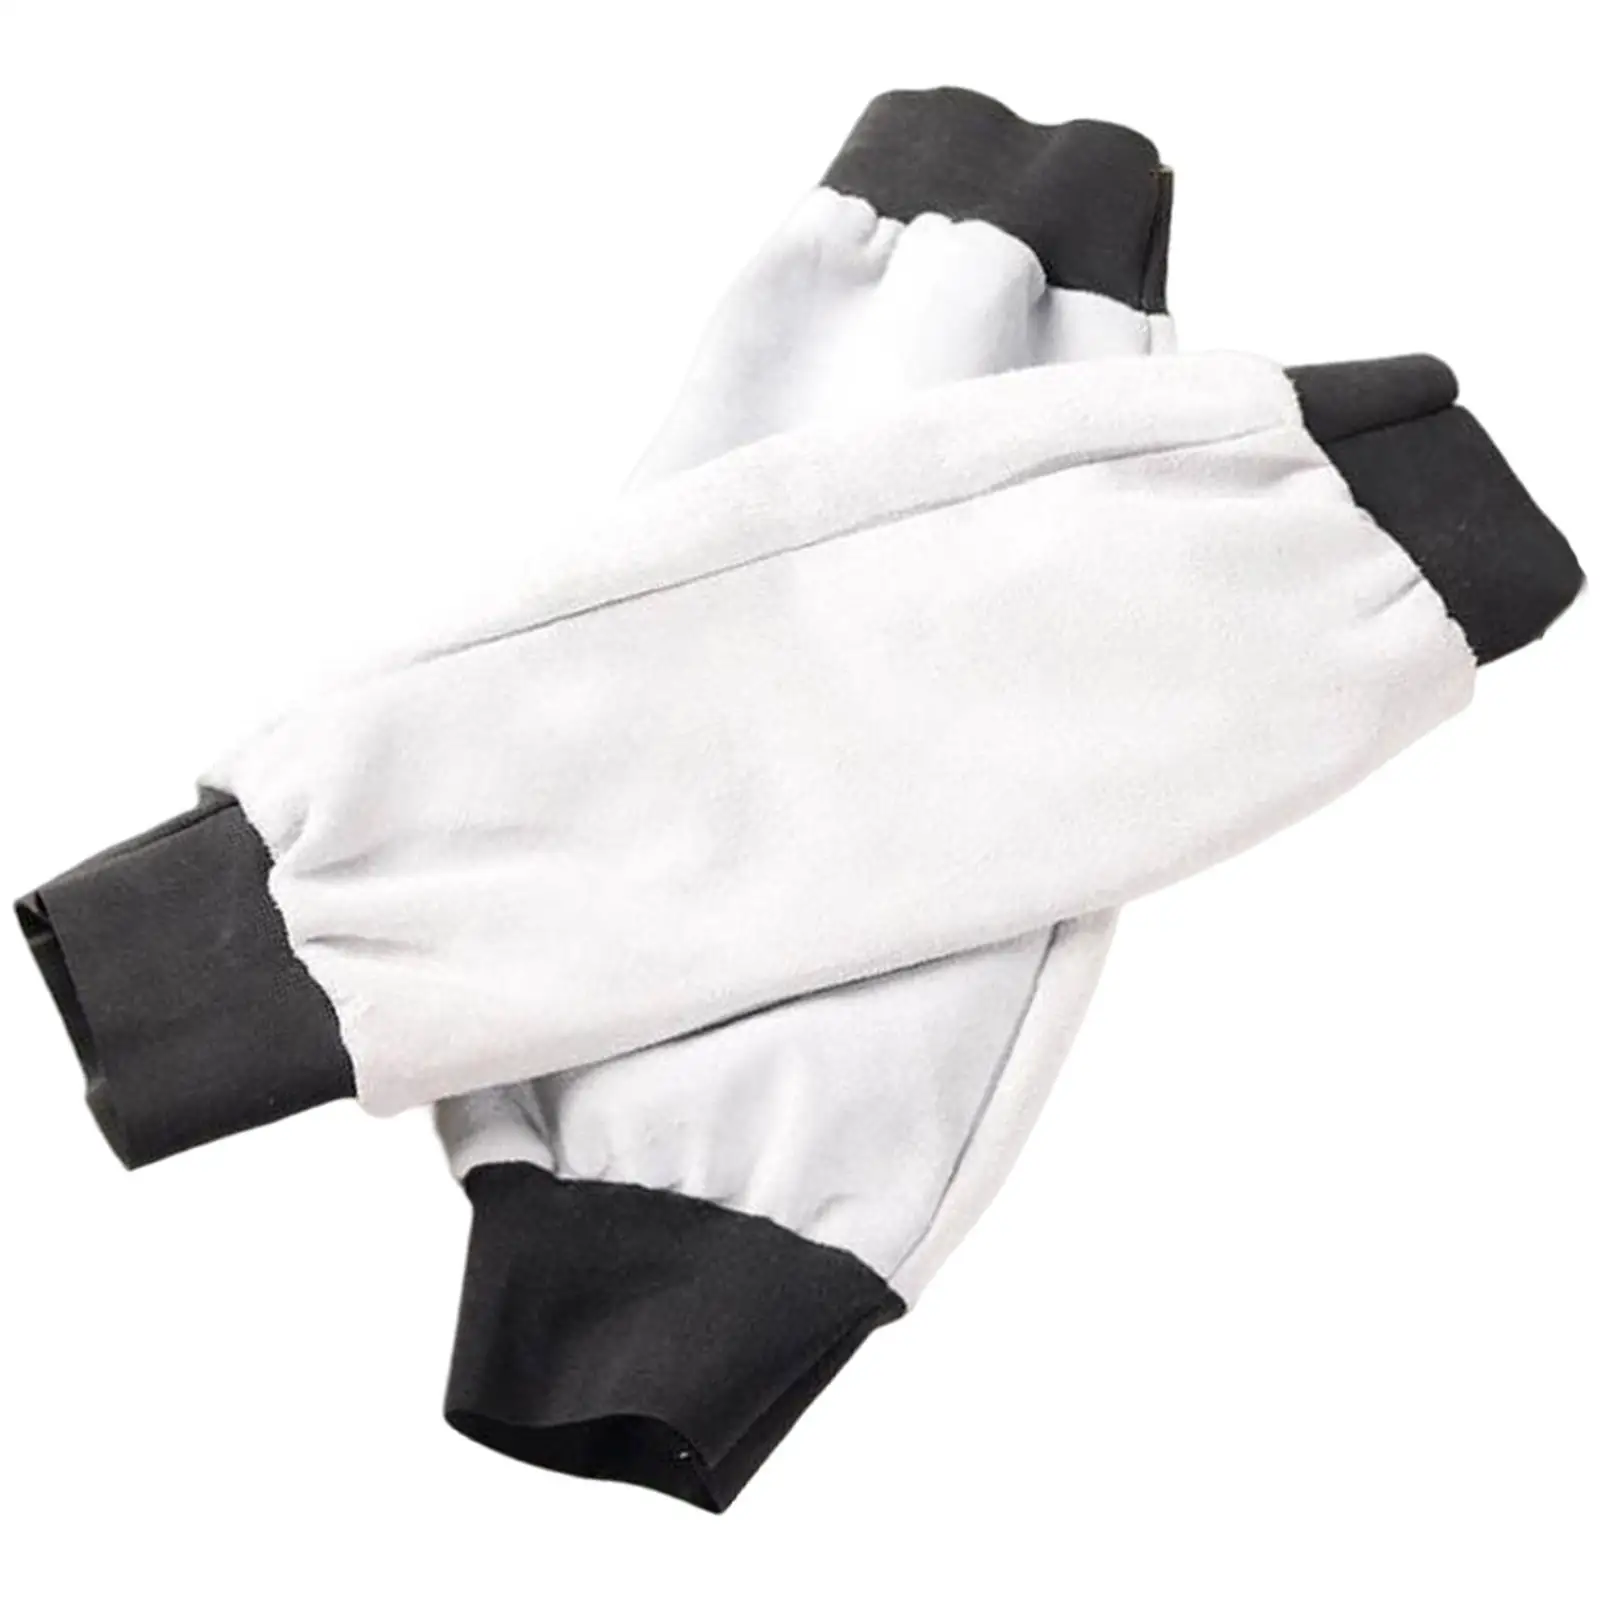 Welding sleeves Flame resistant arm protection for welder 18